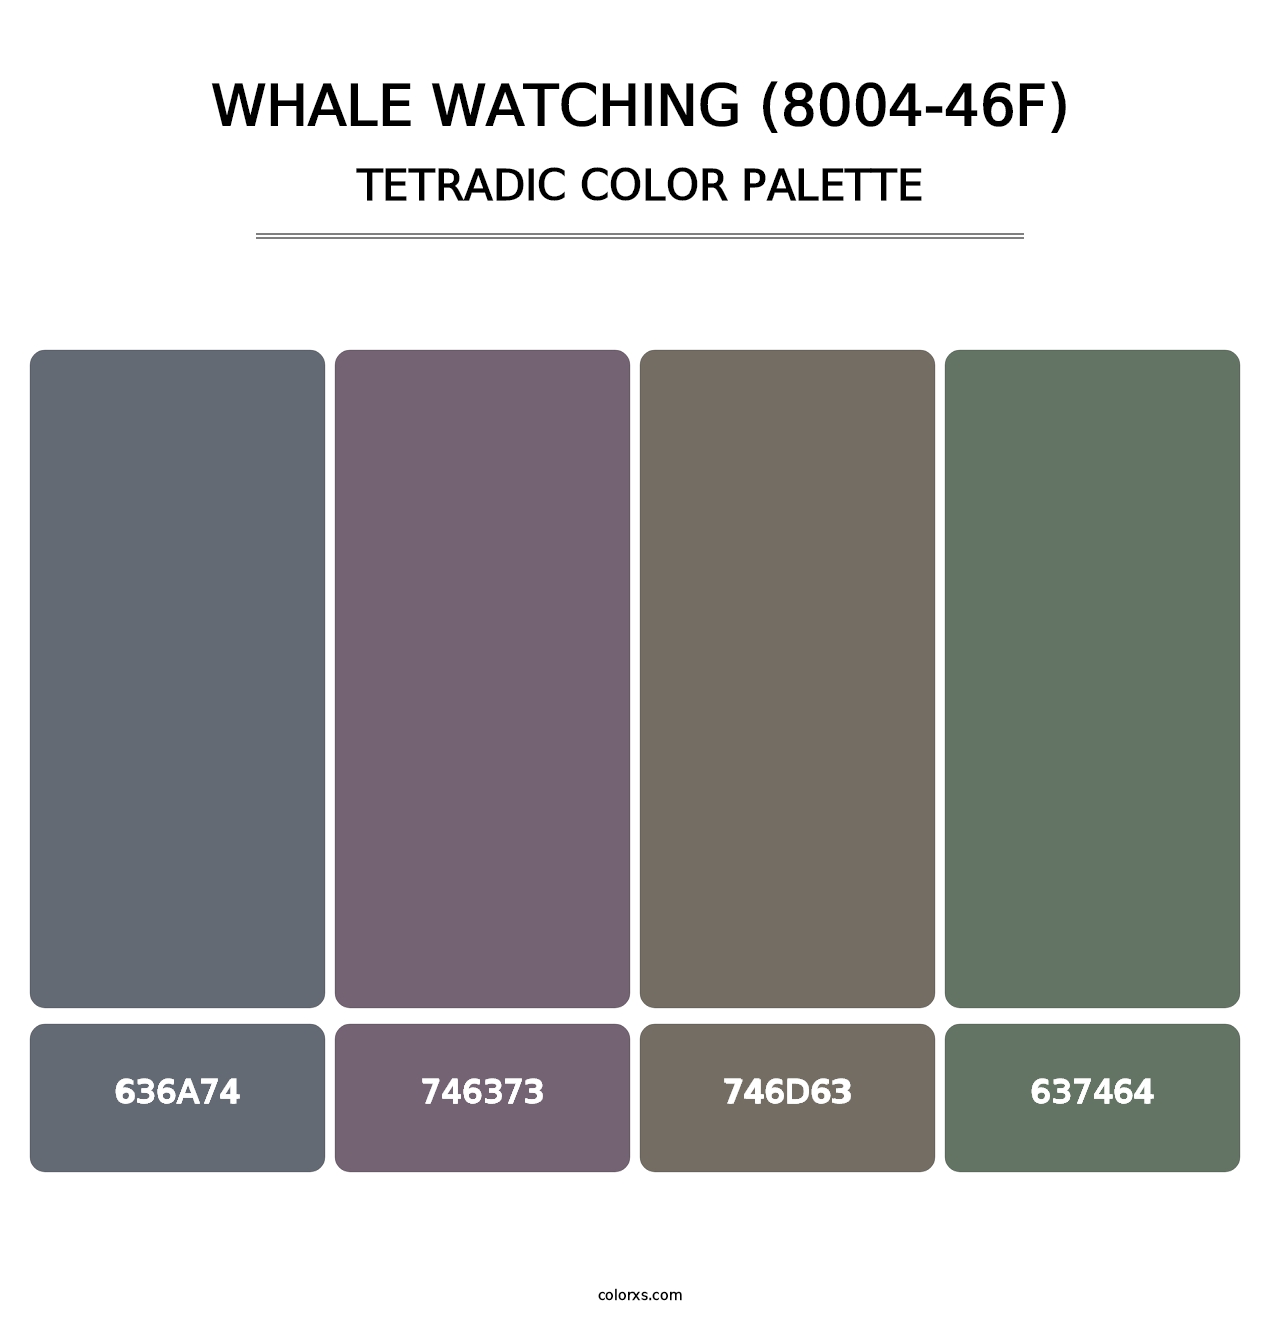 Whale Watching (8004-46F) - Tetradic Color Palette